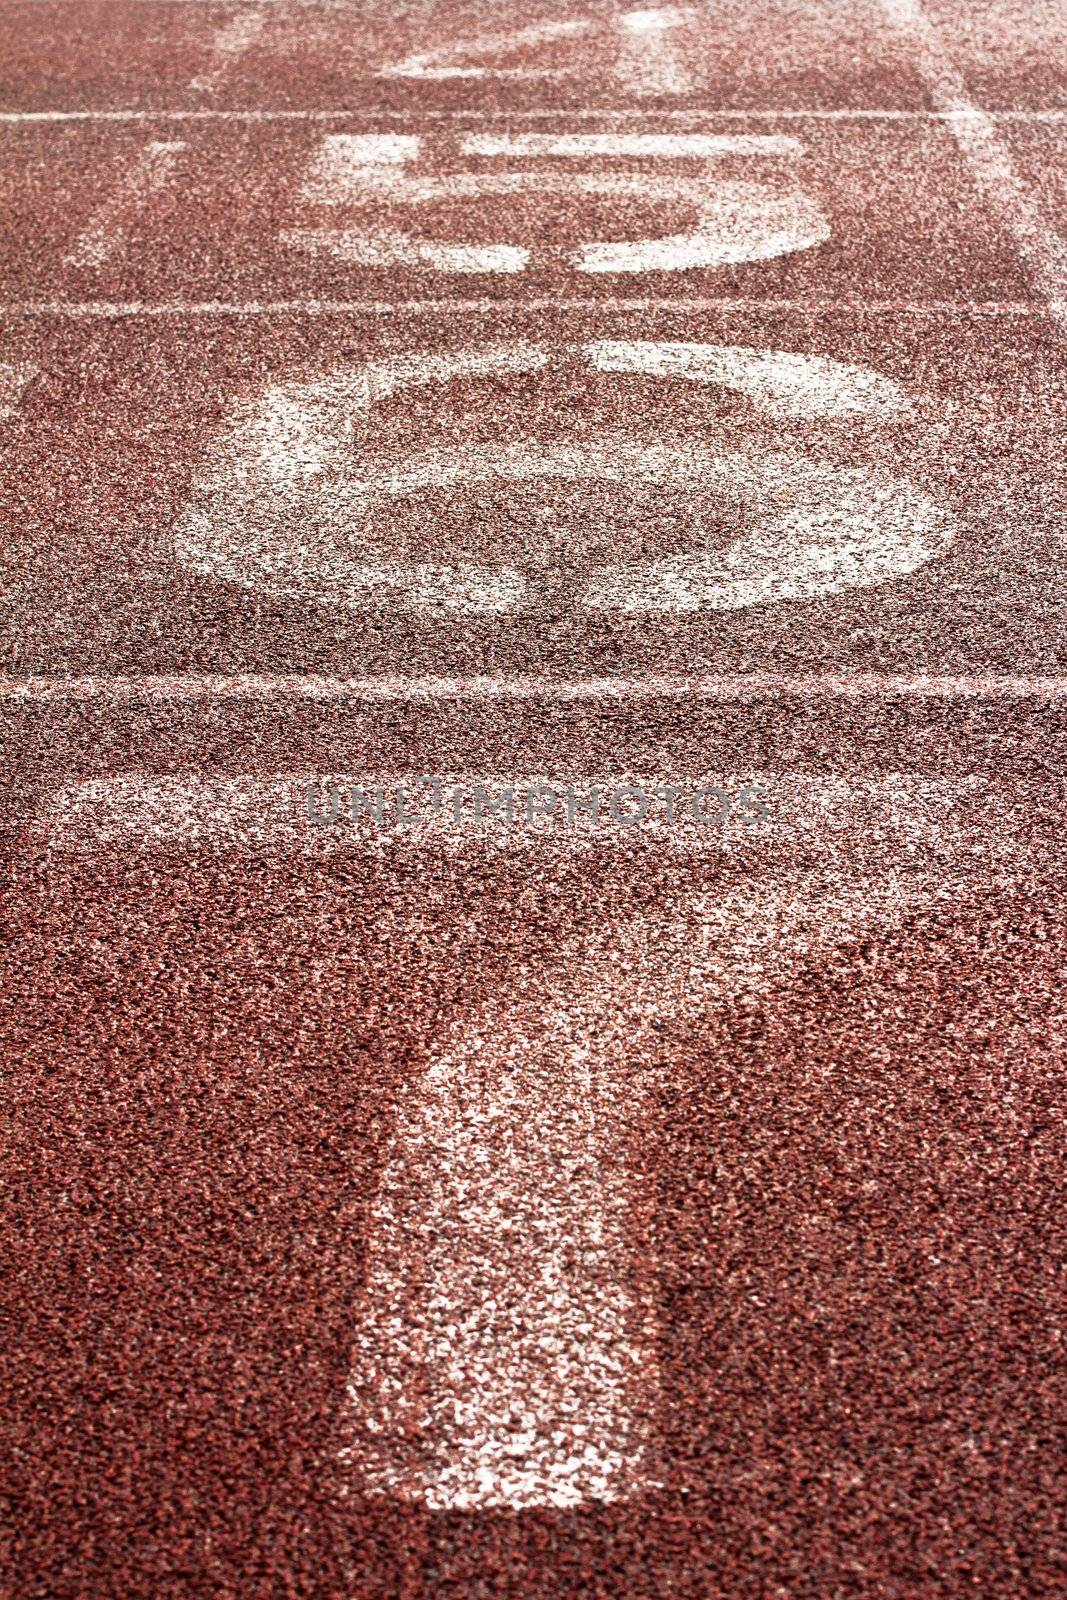 number on a running track by ponsulak